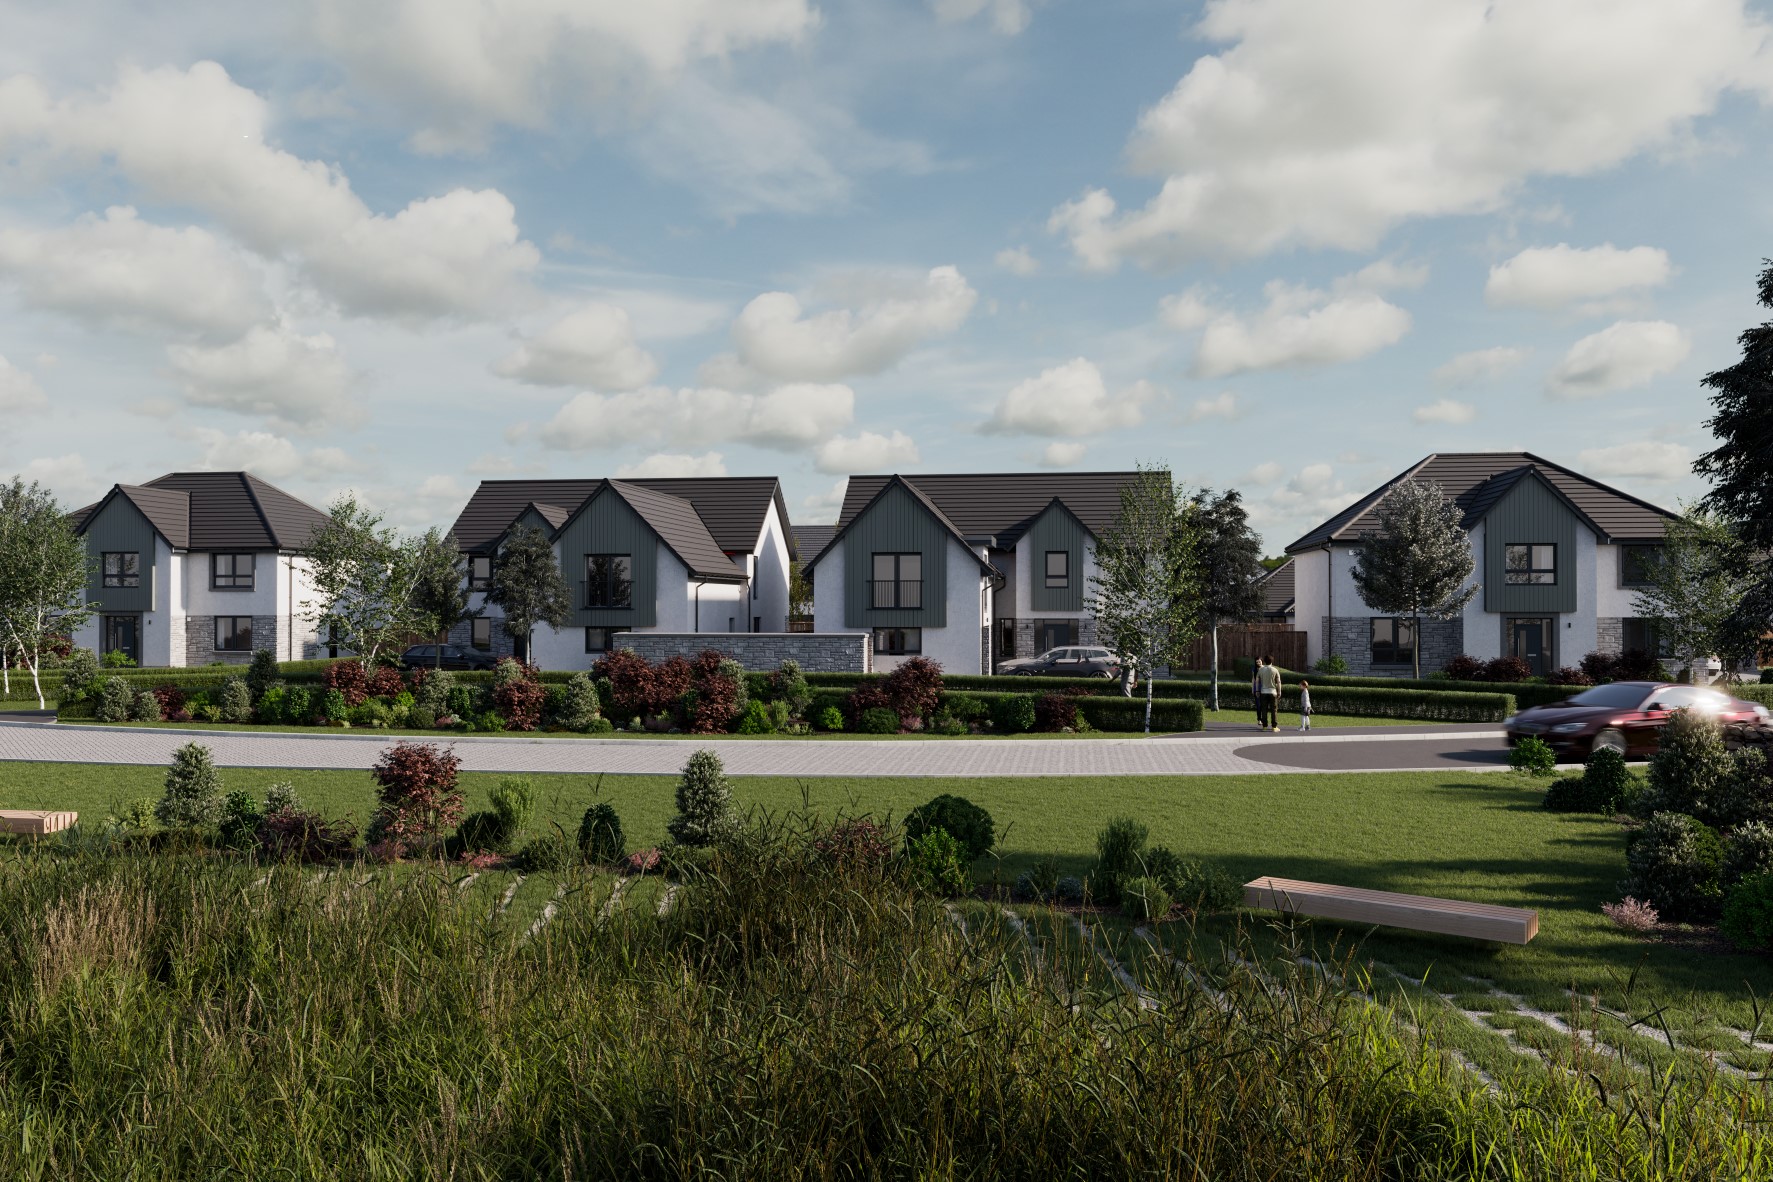 Cala Homes secures purchase of Killearn Hospital site